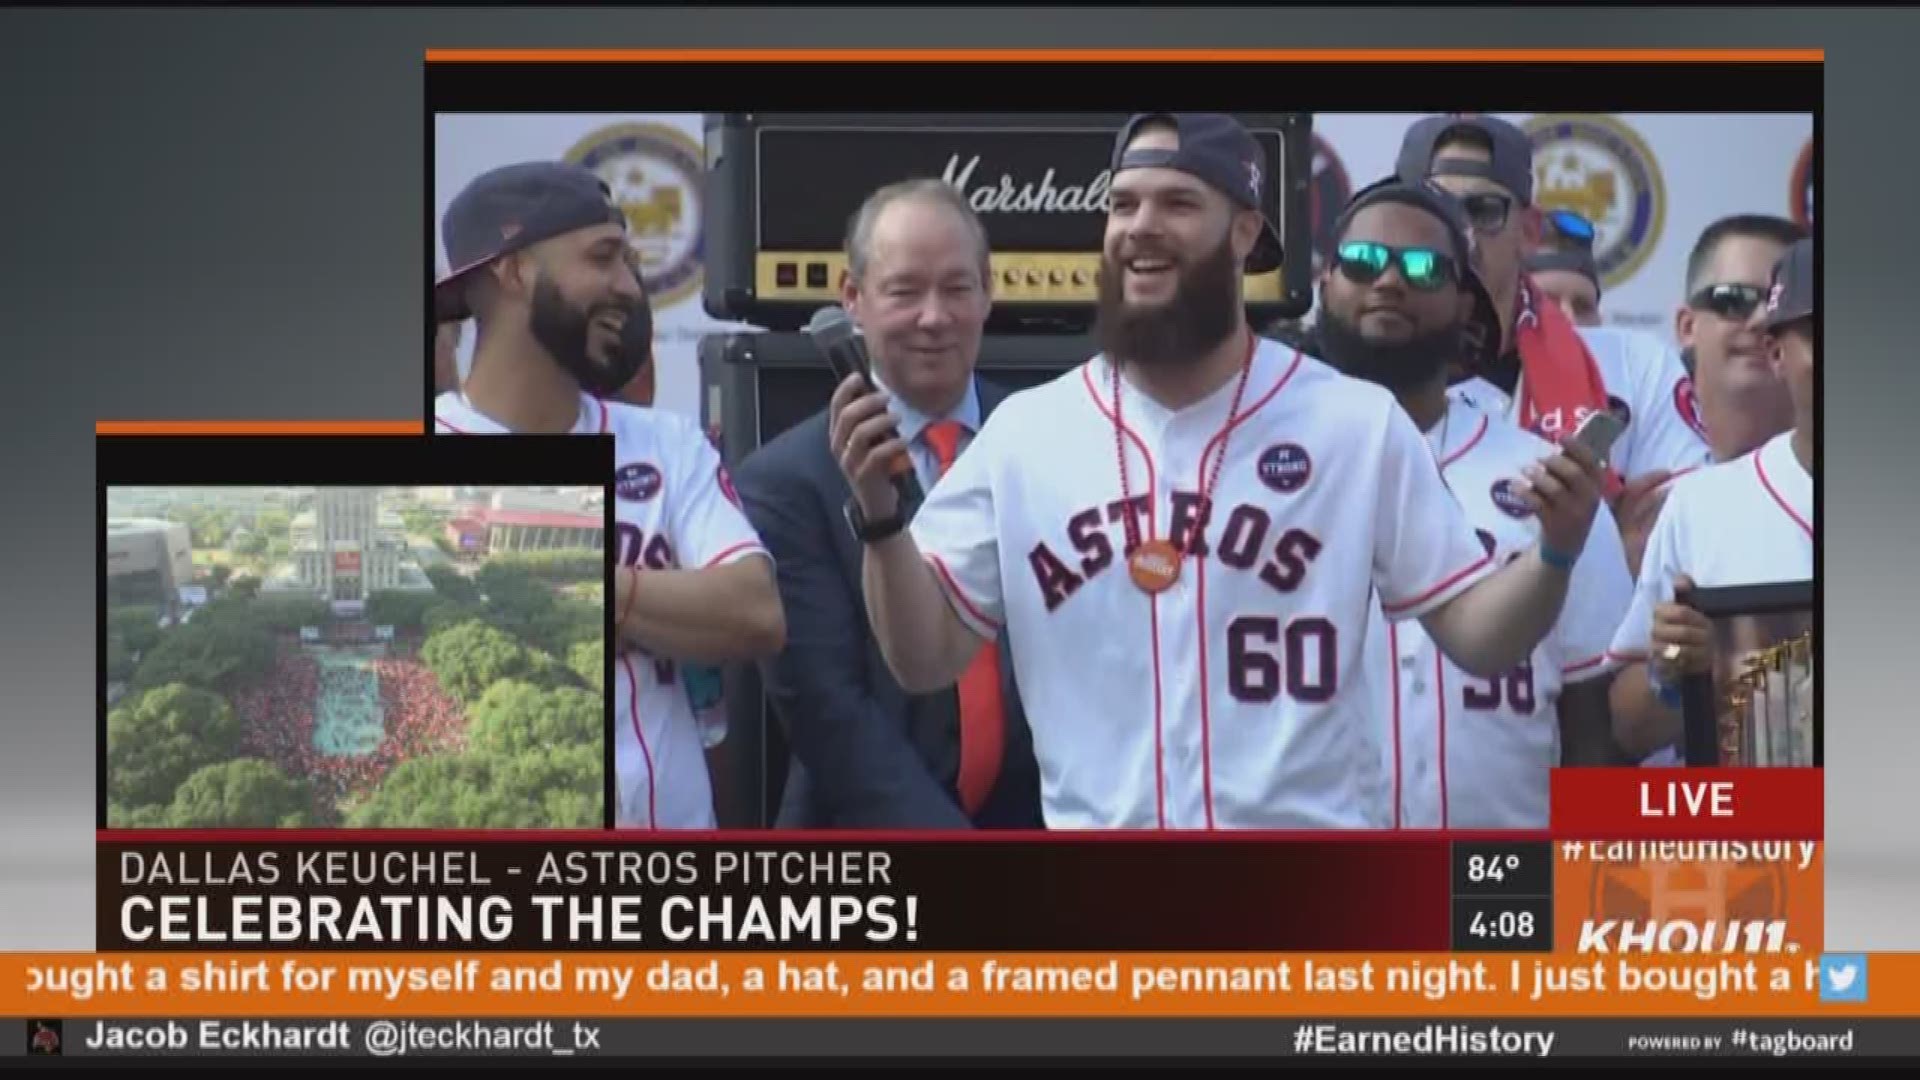 Houston Astros starter Dallas Keuchel spent his time on stage filming the crowd, asking fans to cheer for Justin Verlander, who wasn't at the parade on Friday.